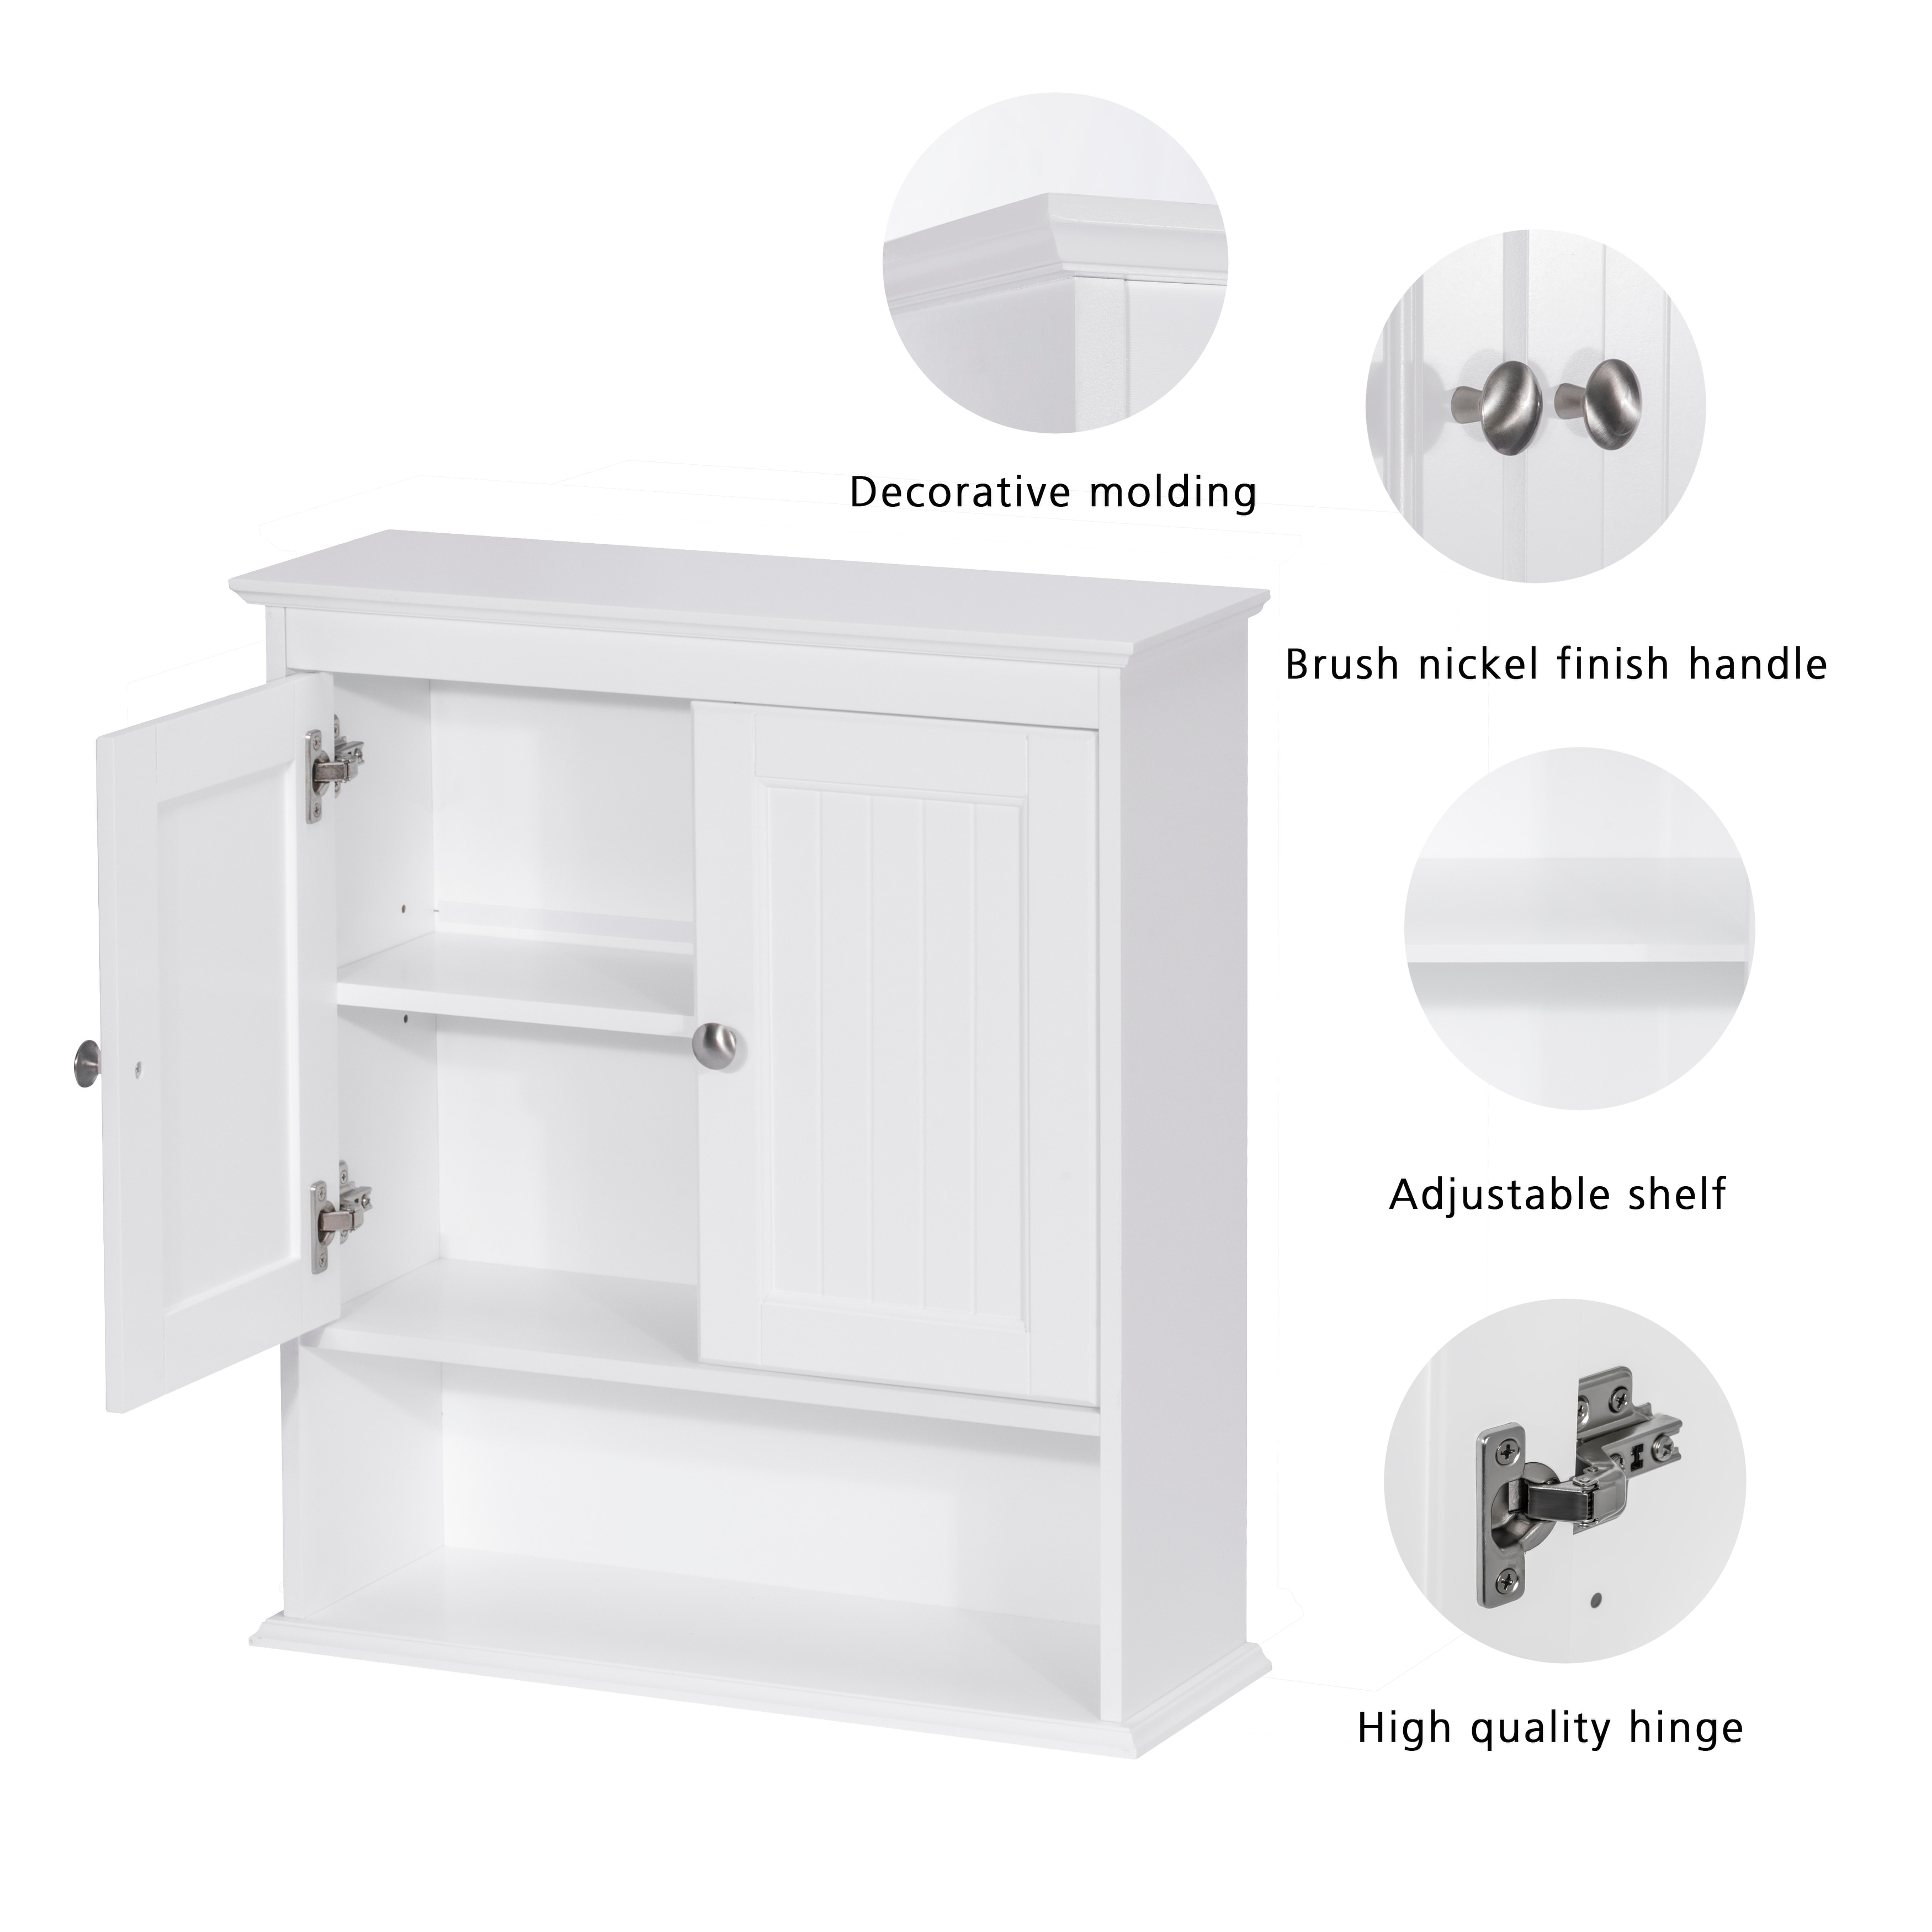 https://ak1.ostkcdn.com/images/products/is/images/direct/b02dfff9eaa78cf1c82f1e8e422245c0b031a344/Spirich-Home-Bathroom-Two-Doo-Wall-Cabinet%2C-Wood-Hanging-Cabinet%2C-Wall-Cabinets-with-Doors-and-Shelves-Over-The-Toilet%2C-White.jpg